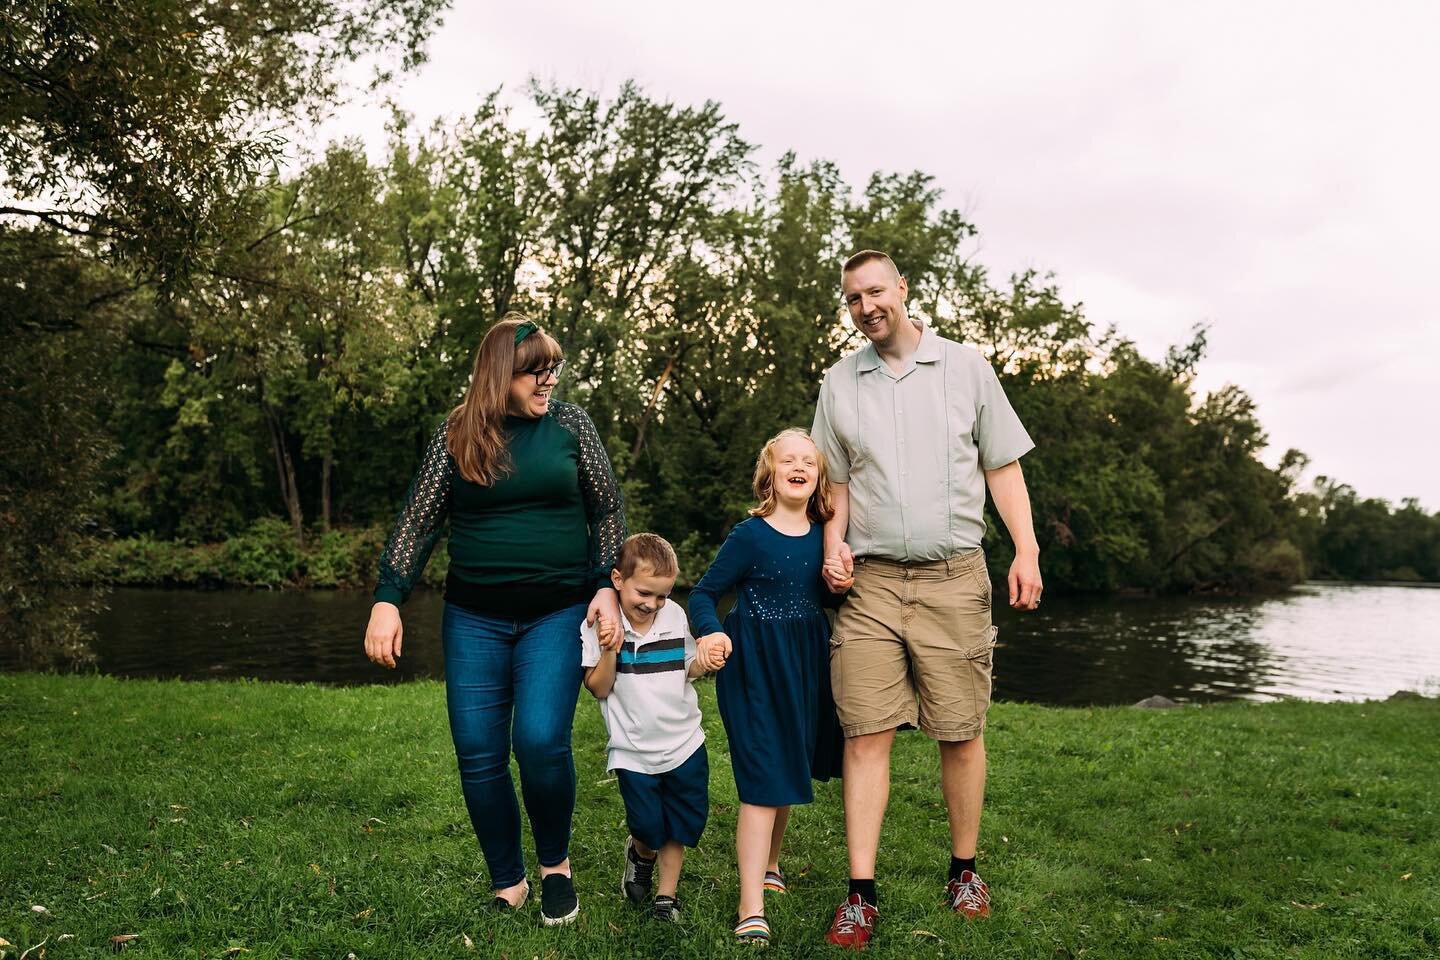 From my amazing client:
&ldquo;Kelly is incredible! We had so much fun doing family photos! It felt more than a family hang-out than a photo session. We laughed and joked, and Kelly joined right in! The awesome thing was: she captured all of that in 